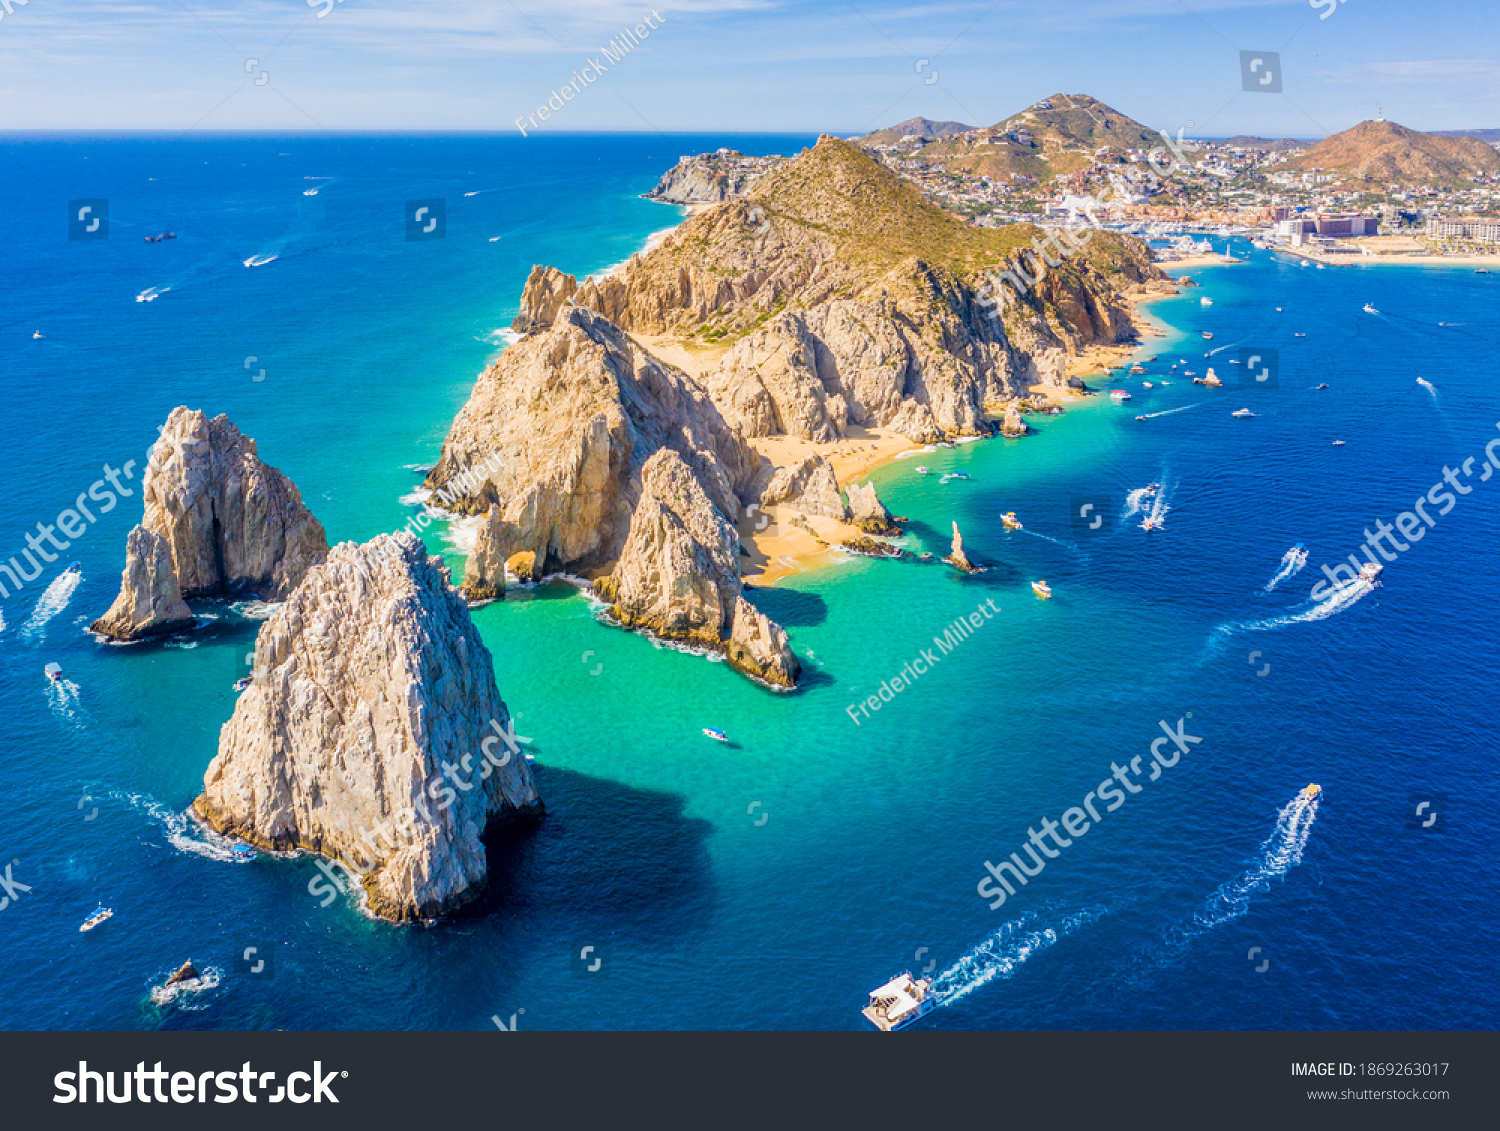 Aerial view of Lands End and the Arch of Cabo San Lucas, Baja California Sur, Mexico, where the Gulf of California meets the Pacific Ocean #1869263017